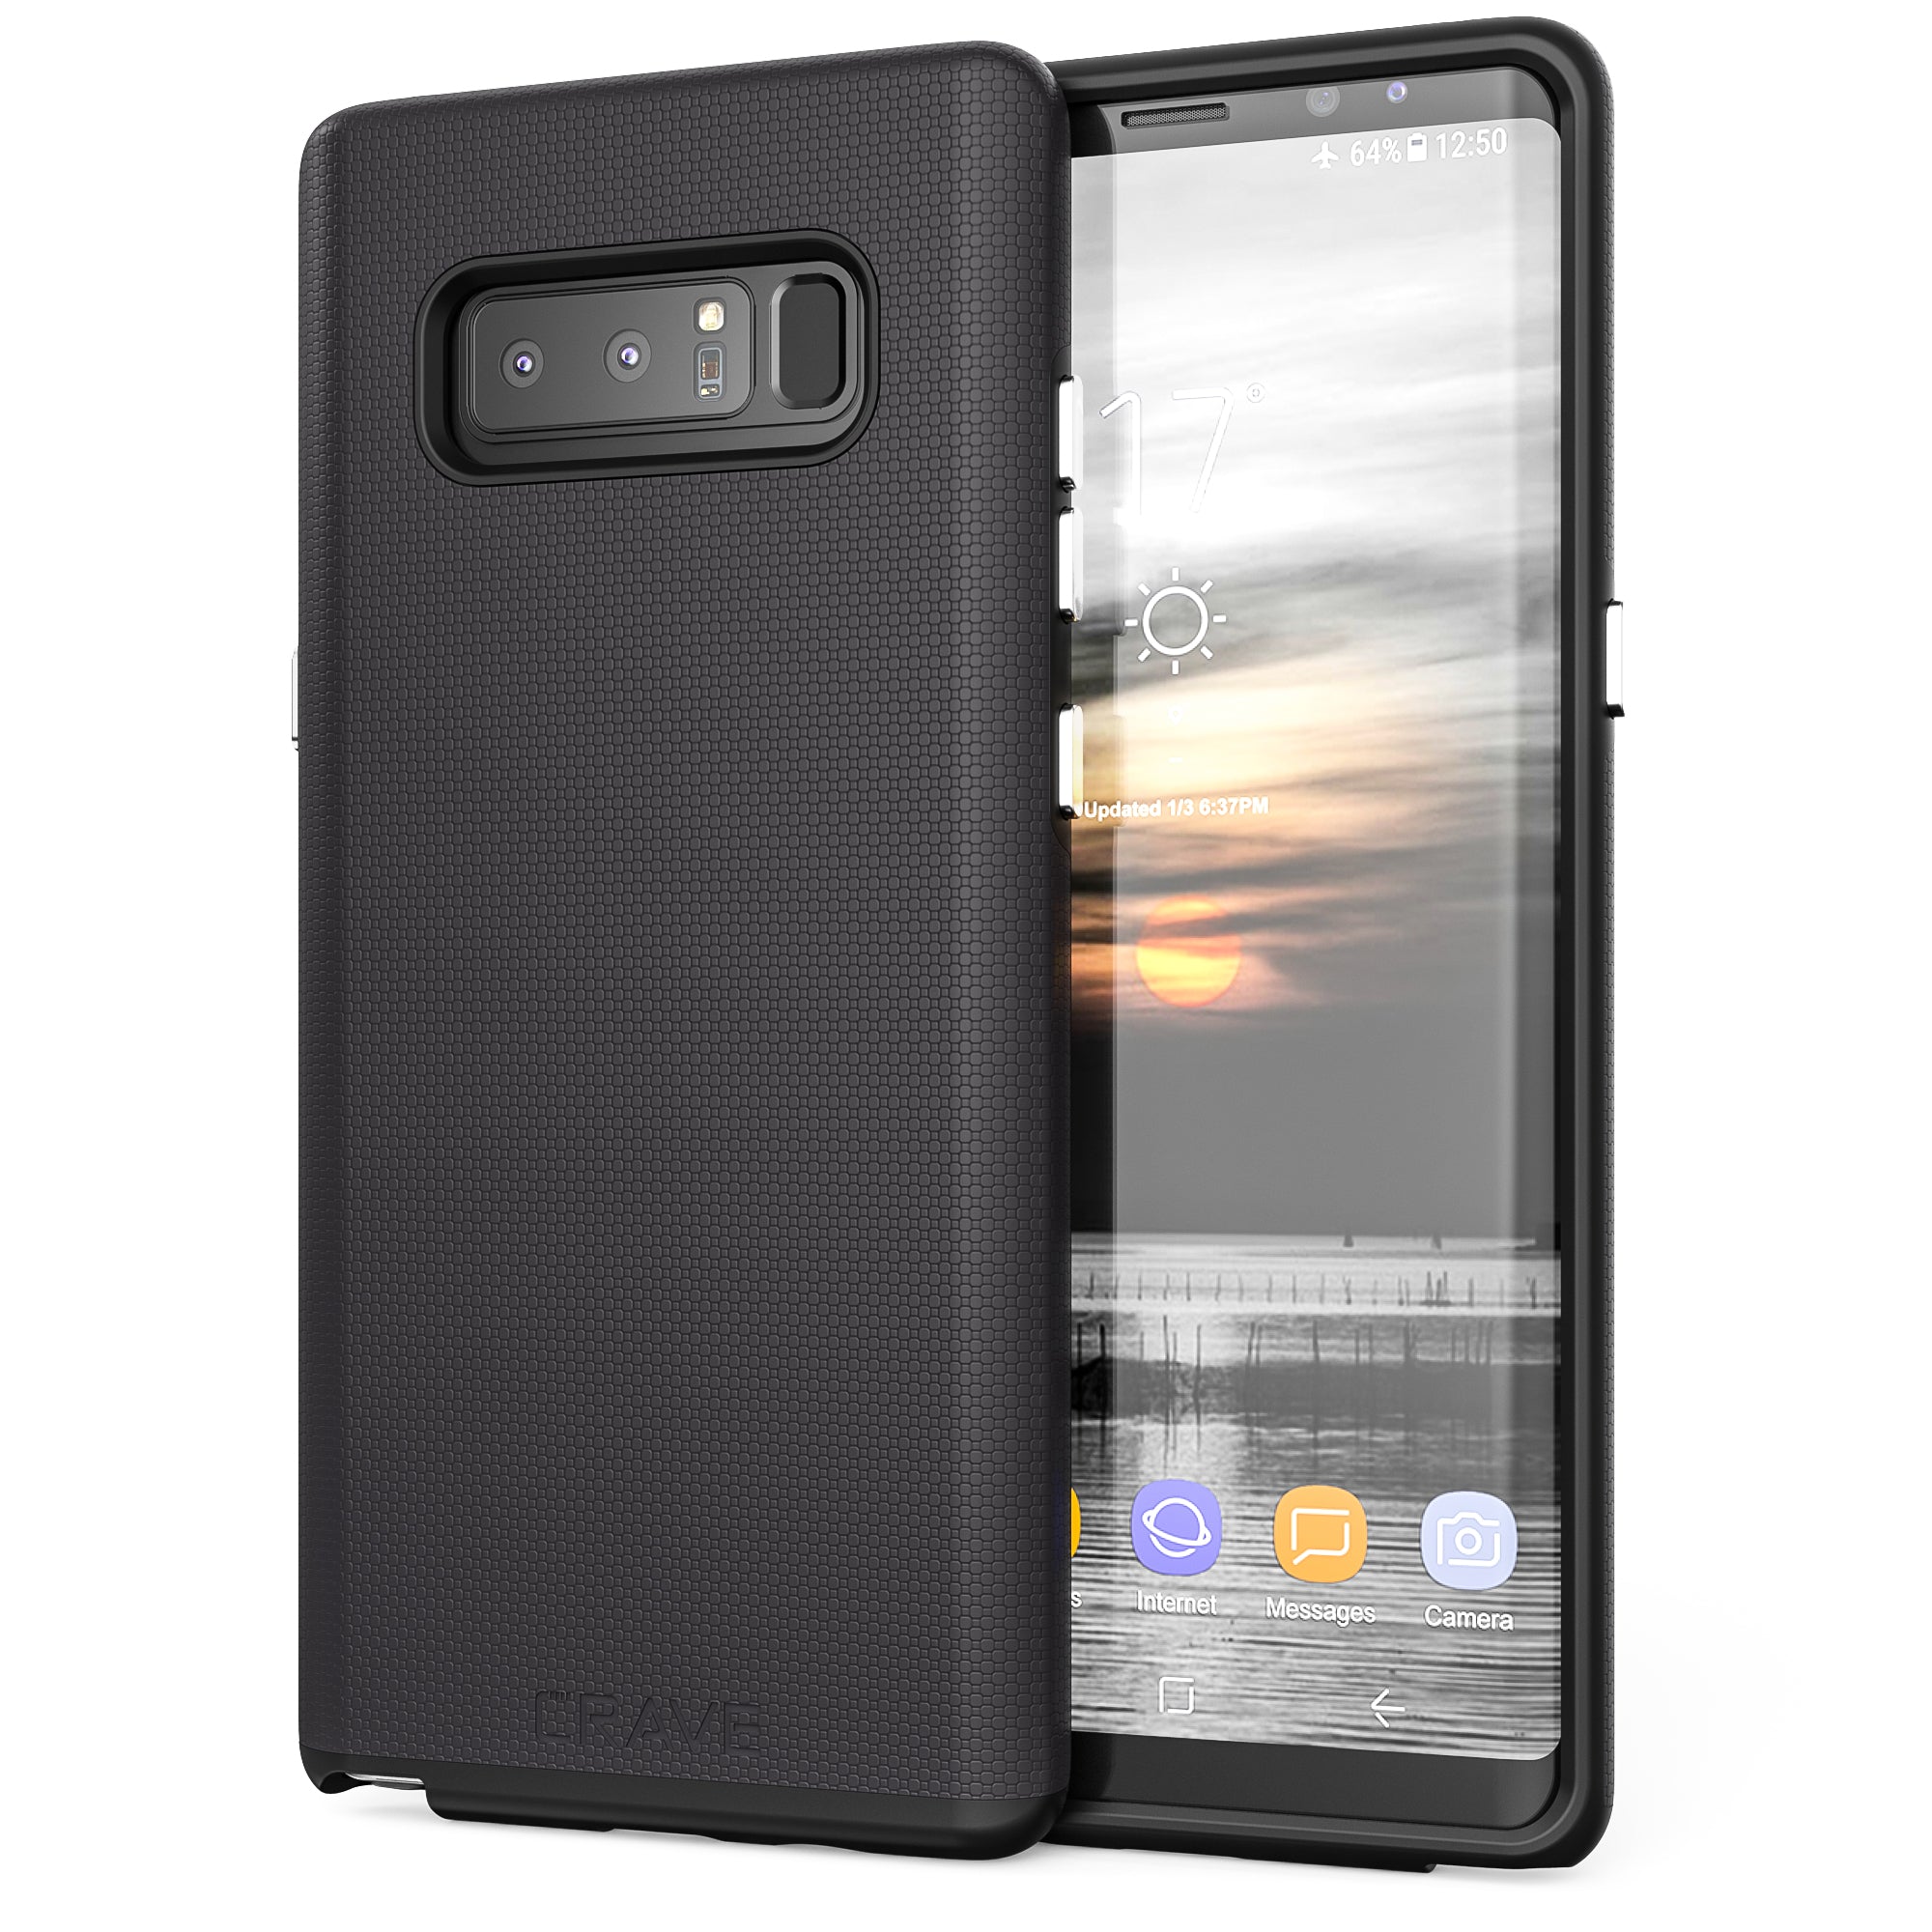 Samsung Galaxy Note 8 Cases - Crave Direct